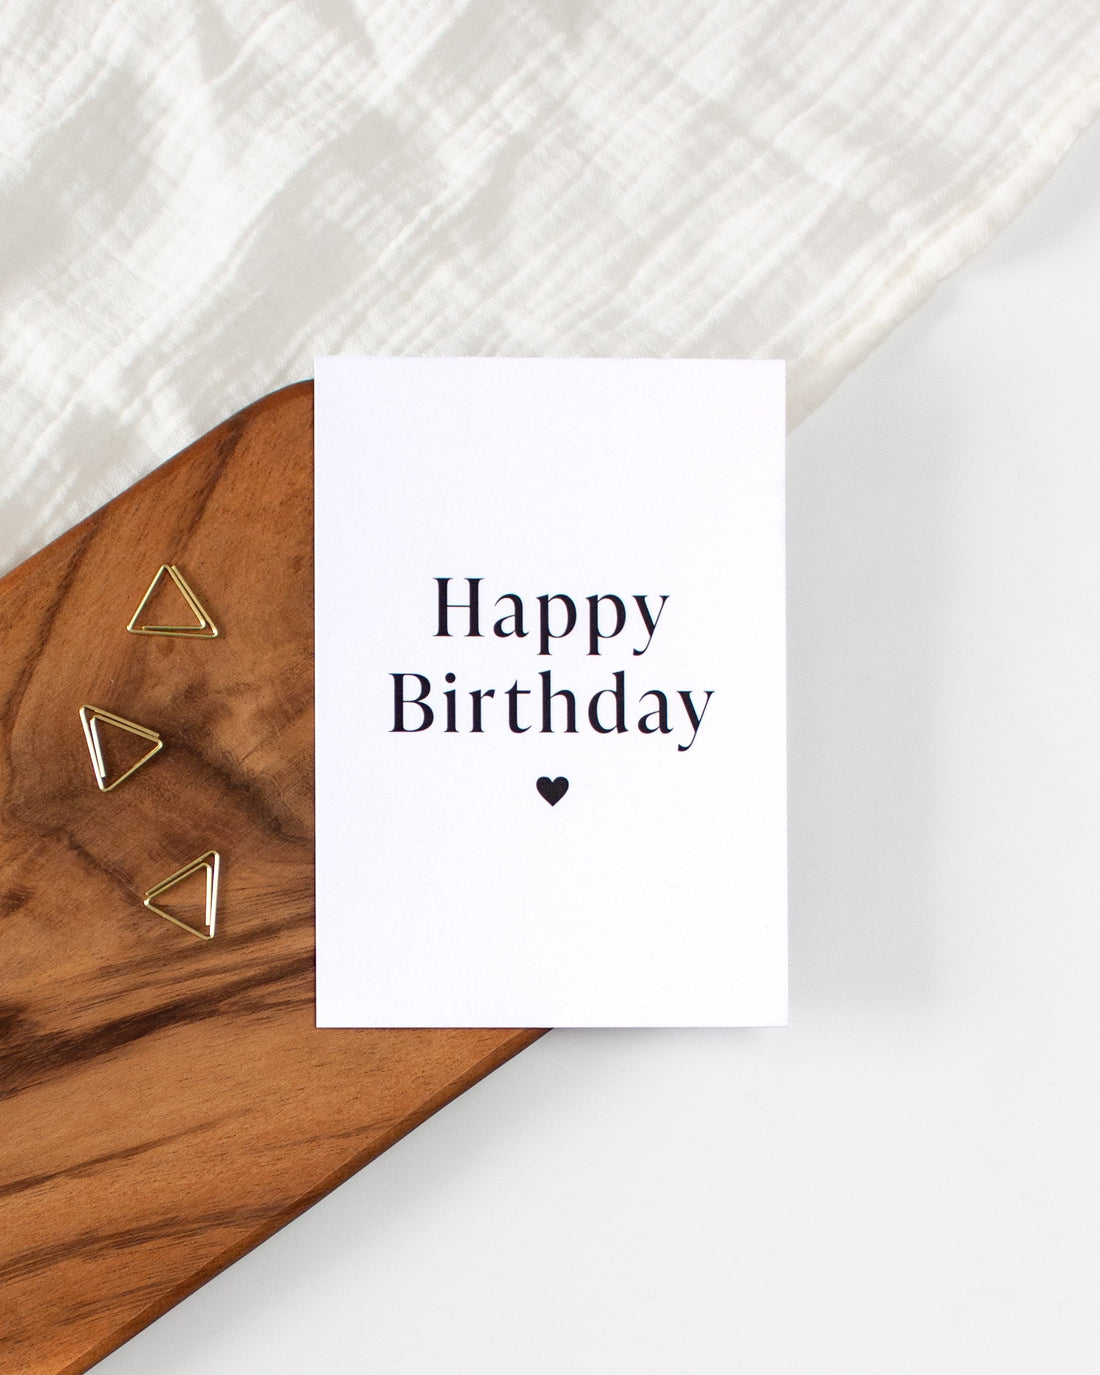 A postcard laying on a wooden board with golden triangle paperclips and a white cloth in the background. The postcard design consists of two big lines of text saying &quot;Happy Birthday&quot; and a small heart below them.